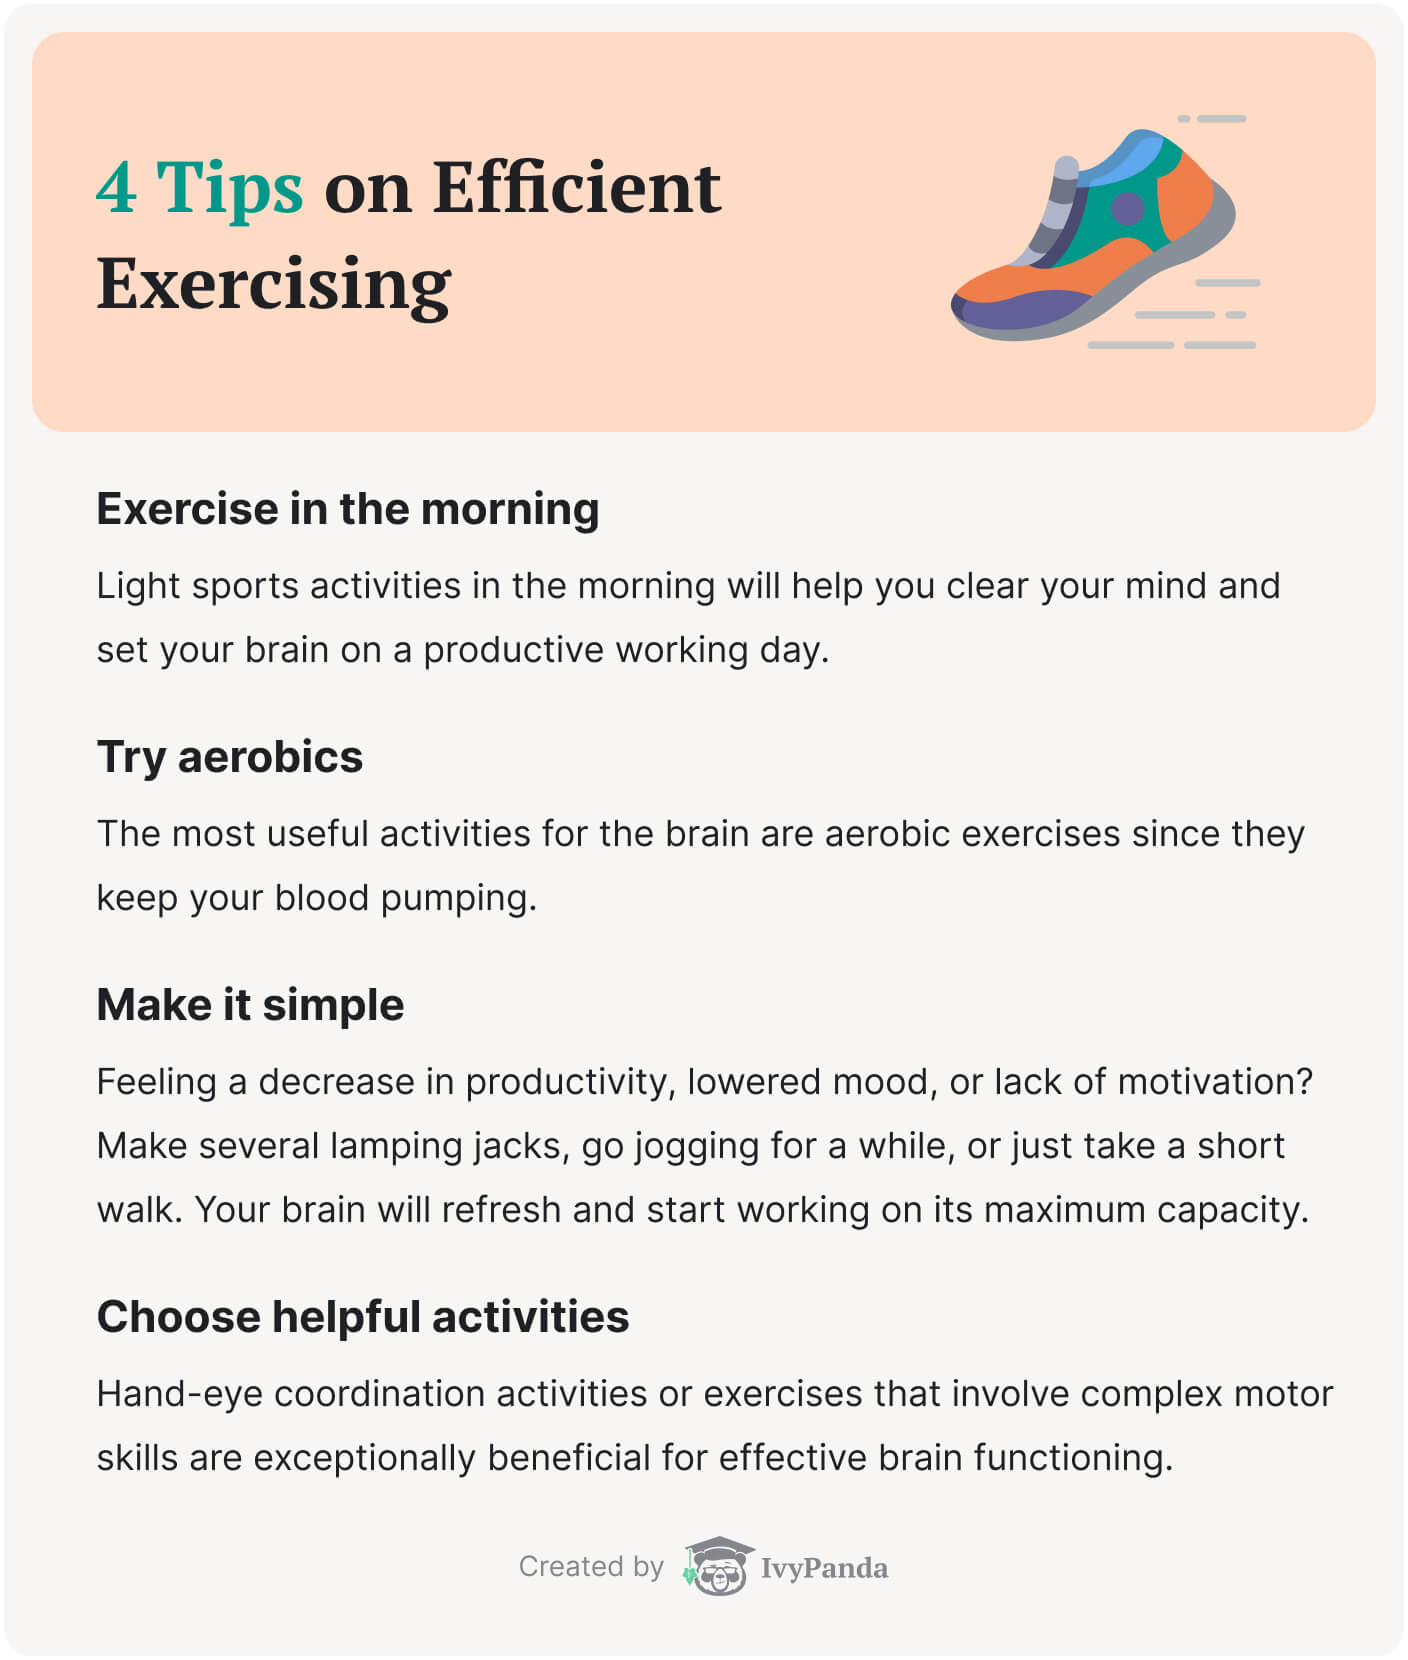 Tips on efficient exercising.